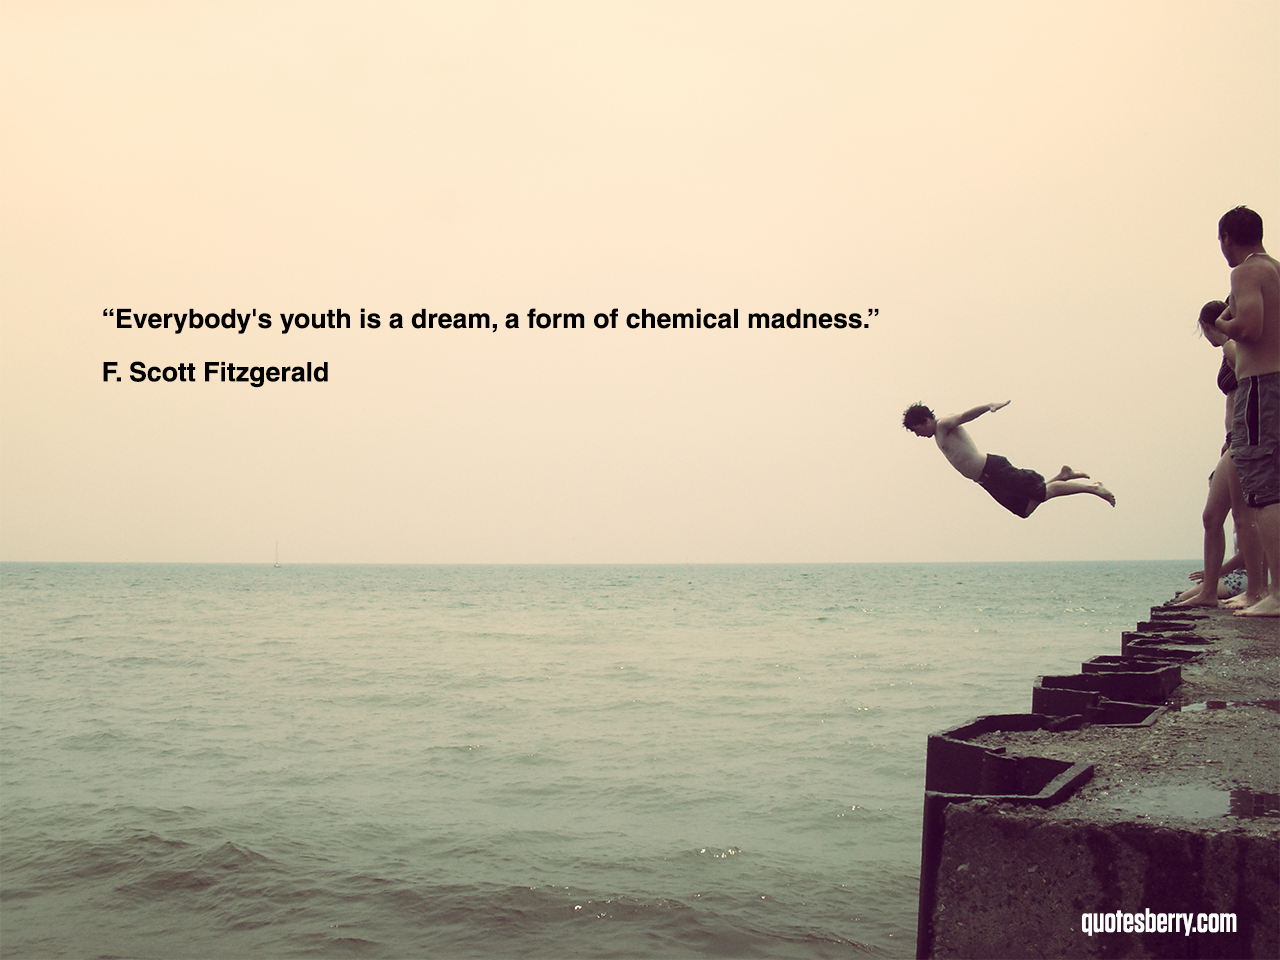 Everybody's youth is a dream, a form of chemical madness. F. Scott Fitzgerald